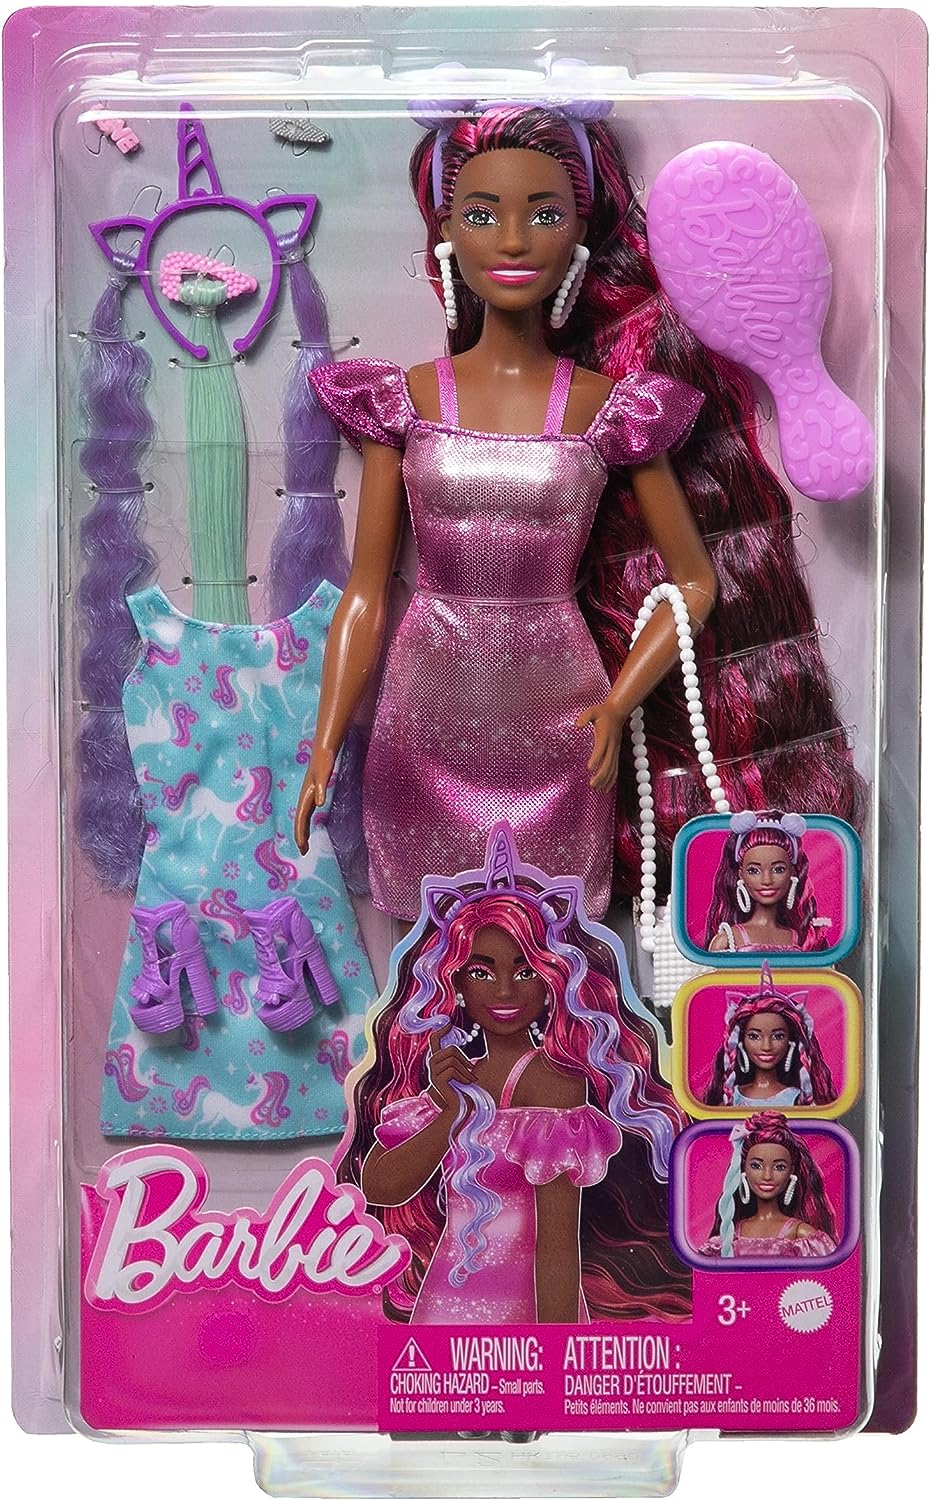 Barbie Fun & Fancy Brunette Hair Doll with Extra-Long Colorful Hair and Shimmery Pink Dress and 10 Hair and Fashion Play Accessories for Kids Ages 3+